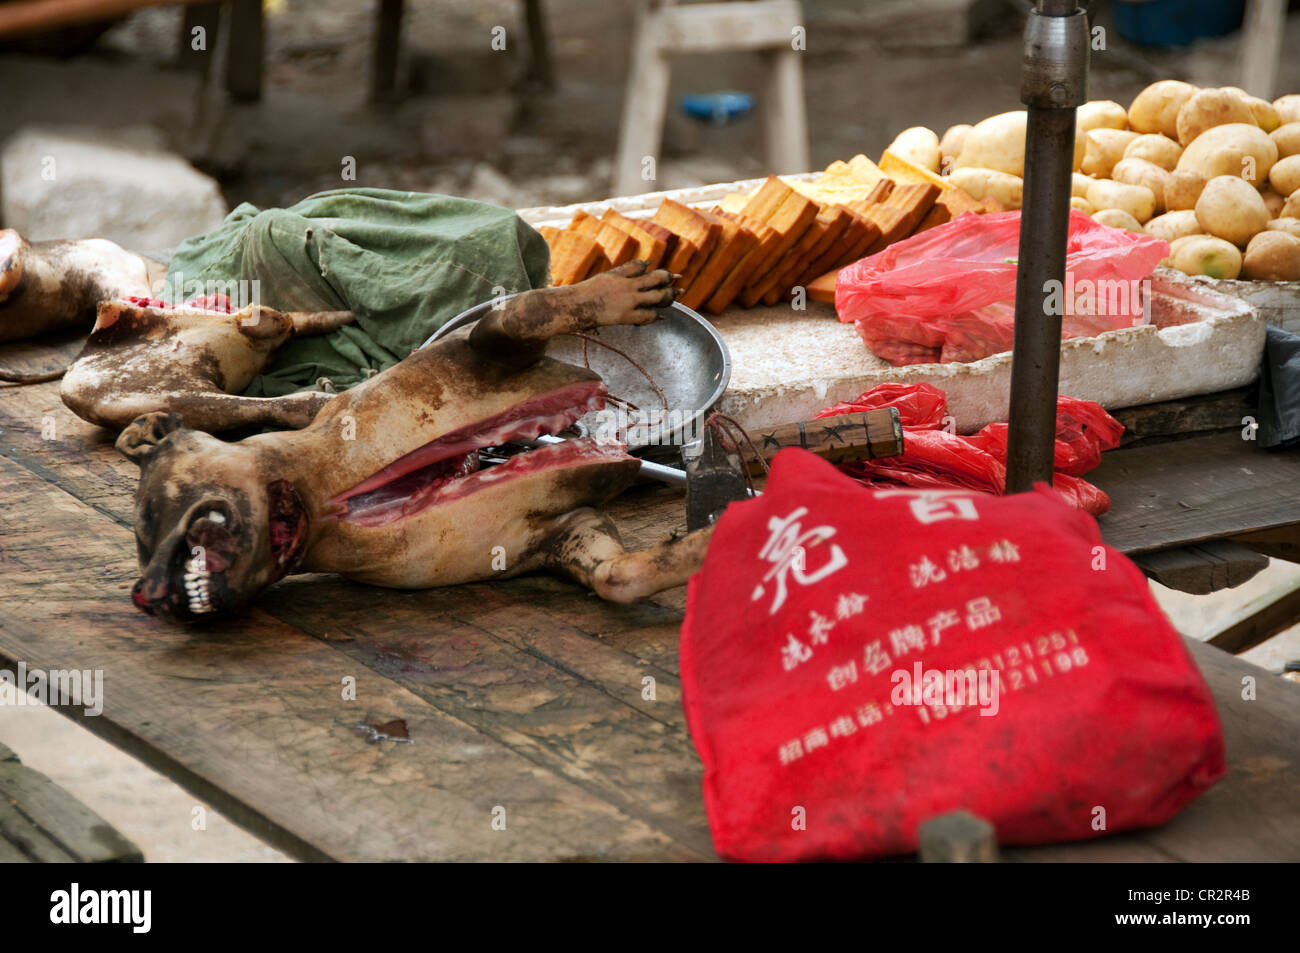 Dog meat and tofu on sale on a market stall, Zhaoxing Dong Village, Southern China Stock Photo